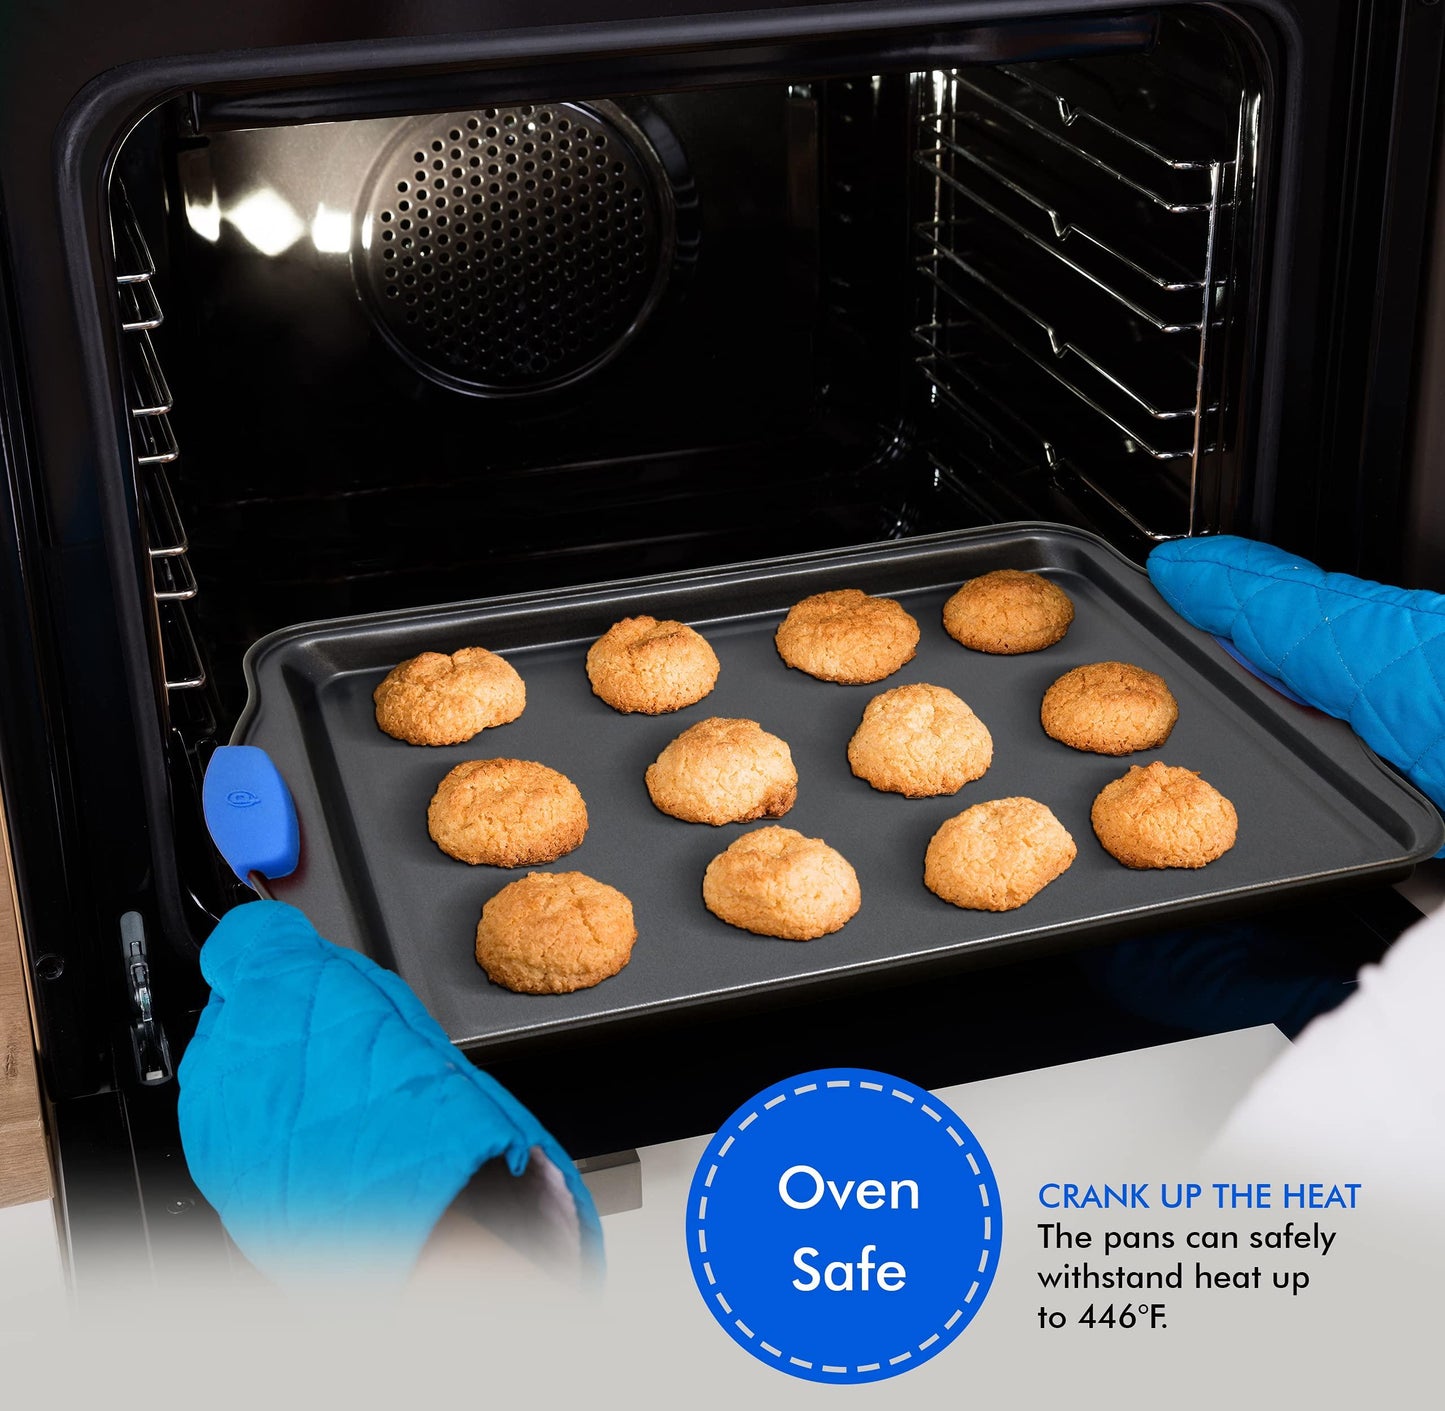 Perlli Cookie Sheets for Baking Non Stick Oven Pan Tray Baking Sheet 3-Piece Set (Small, Medium & Large) Carbon Steel BPA Free Cooking and Baking Trays for Cakes and Cookies with Blue Silicone Grips - CookCave